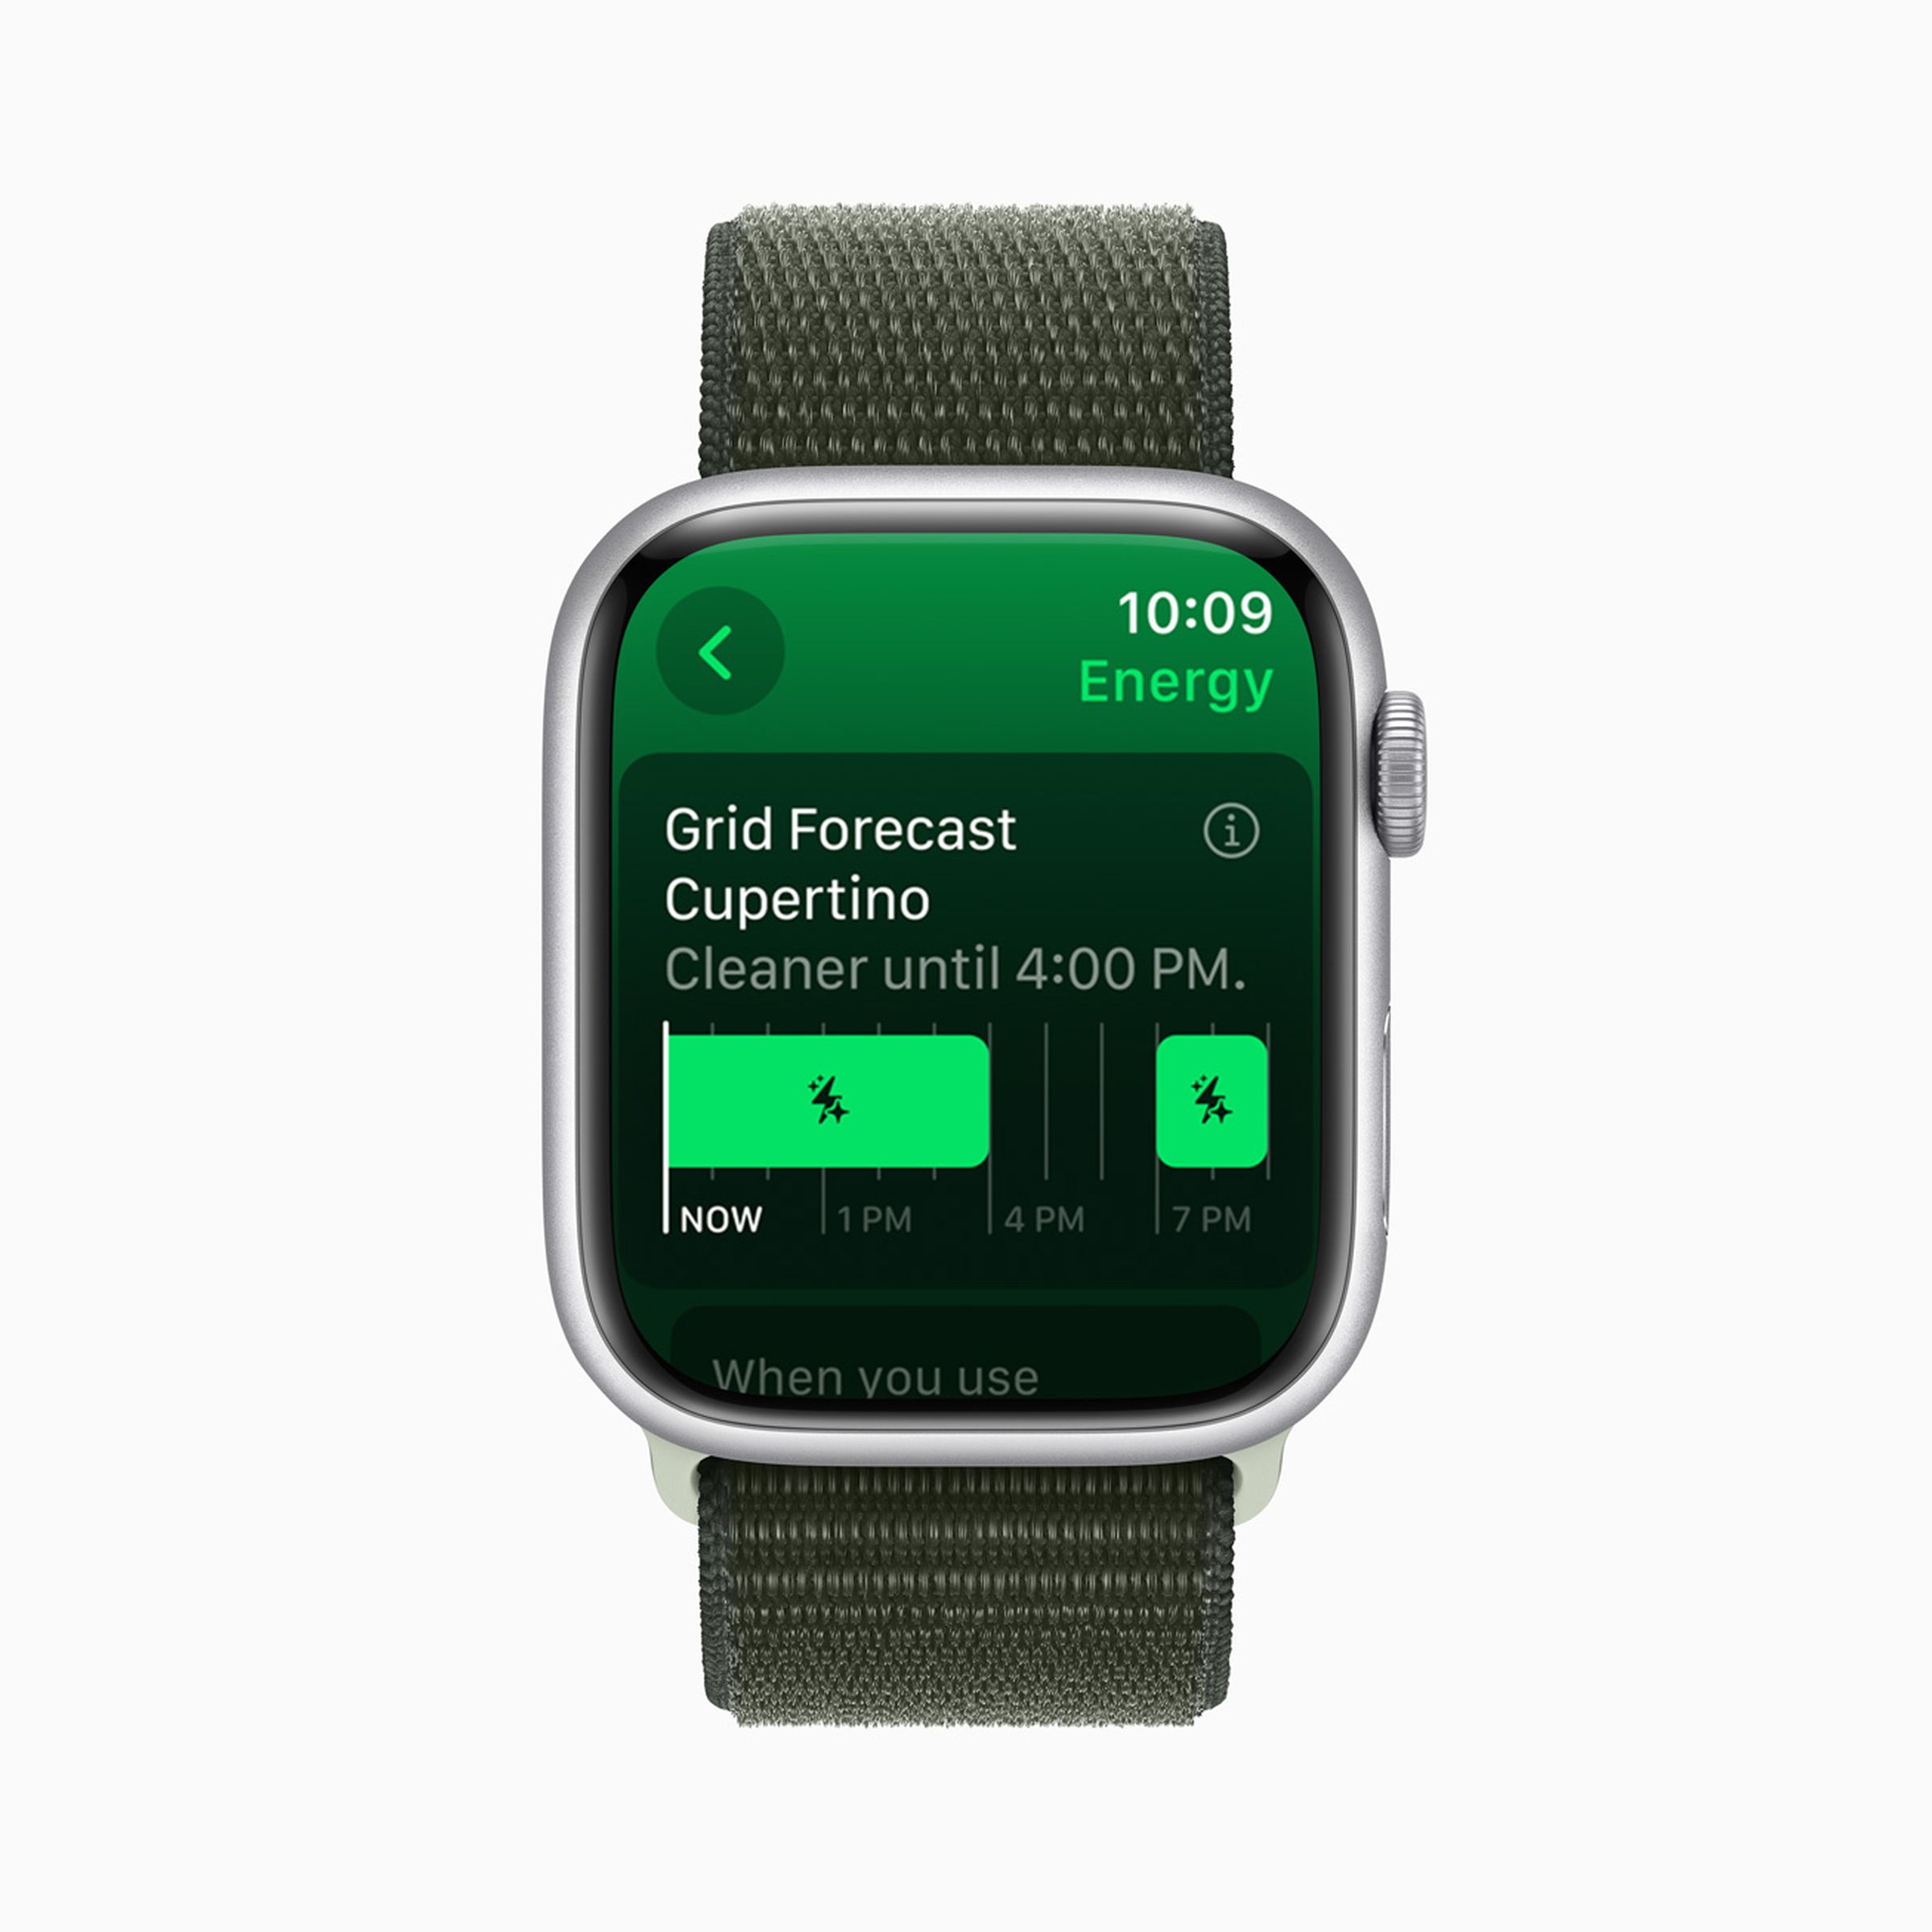 A screenshot of the Grid Forecast feature on an Apple Watch.